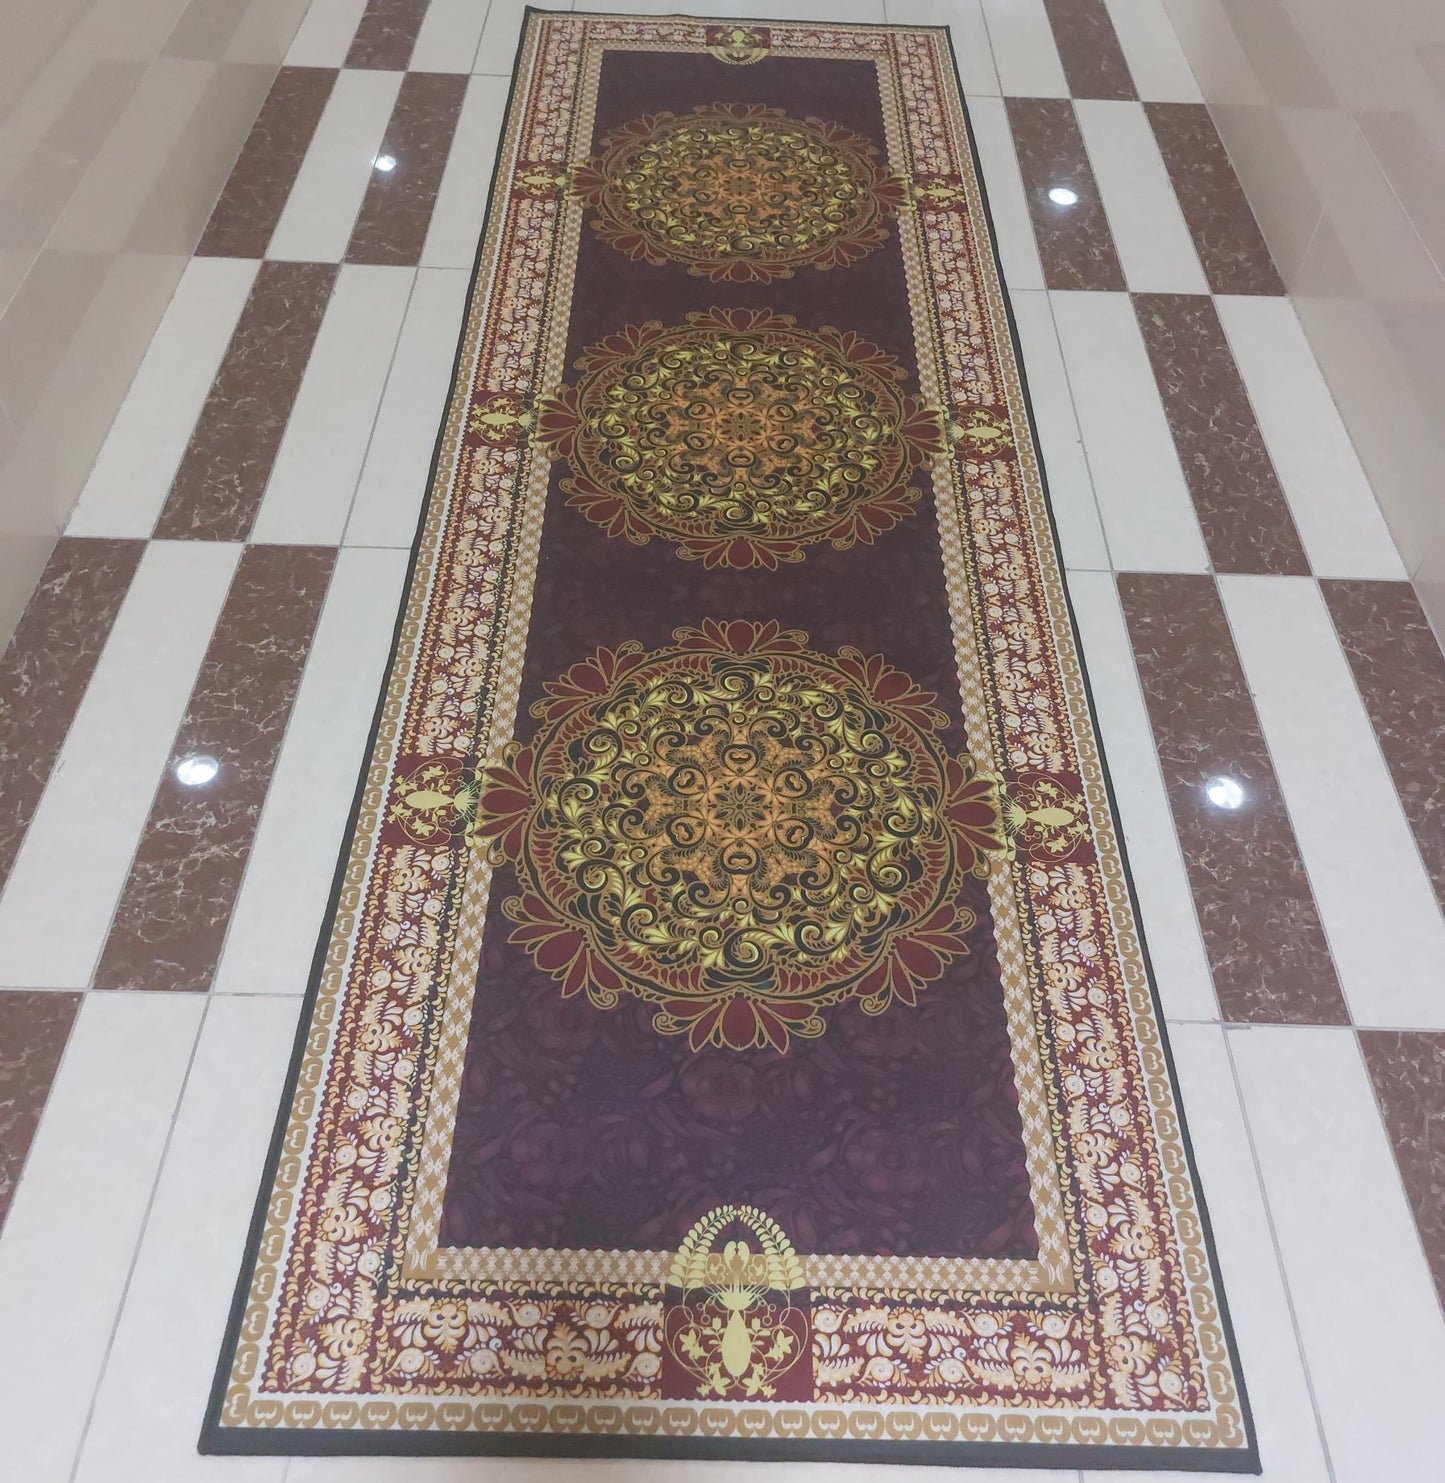 Brand New Crystal  carpet - Runner - Anti slip with Quality specifications 80 x 244cm►2.62 x 8.00ft